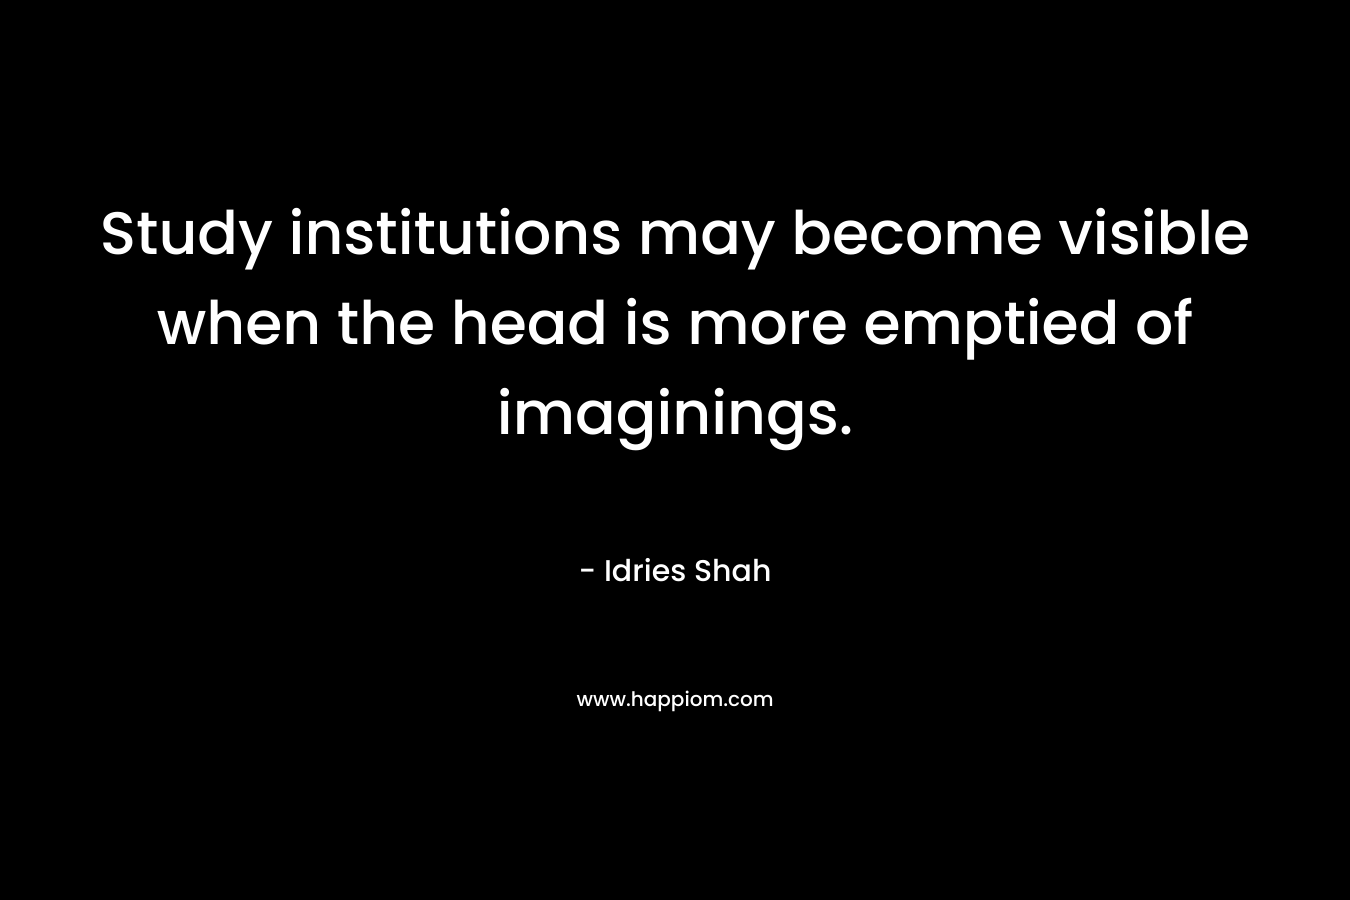 Study institutions may become visible when the head is more emptied of imaginings.